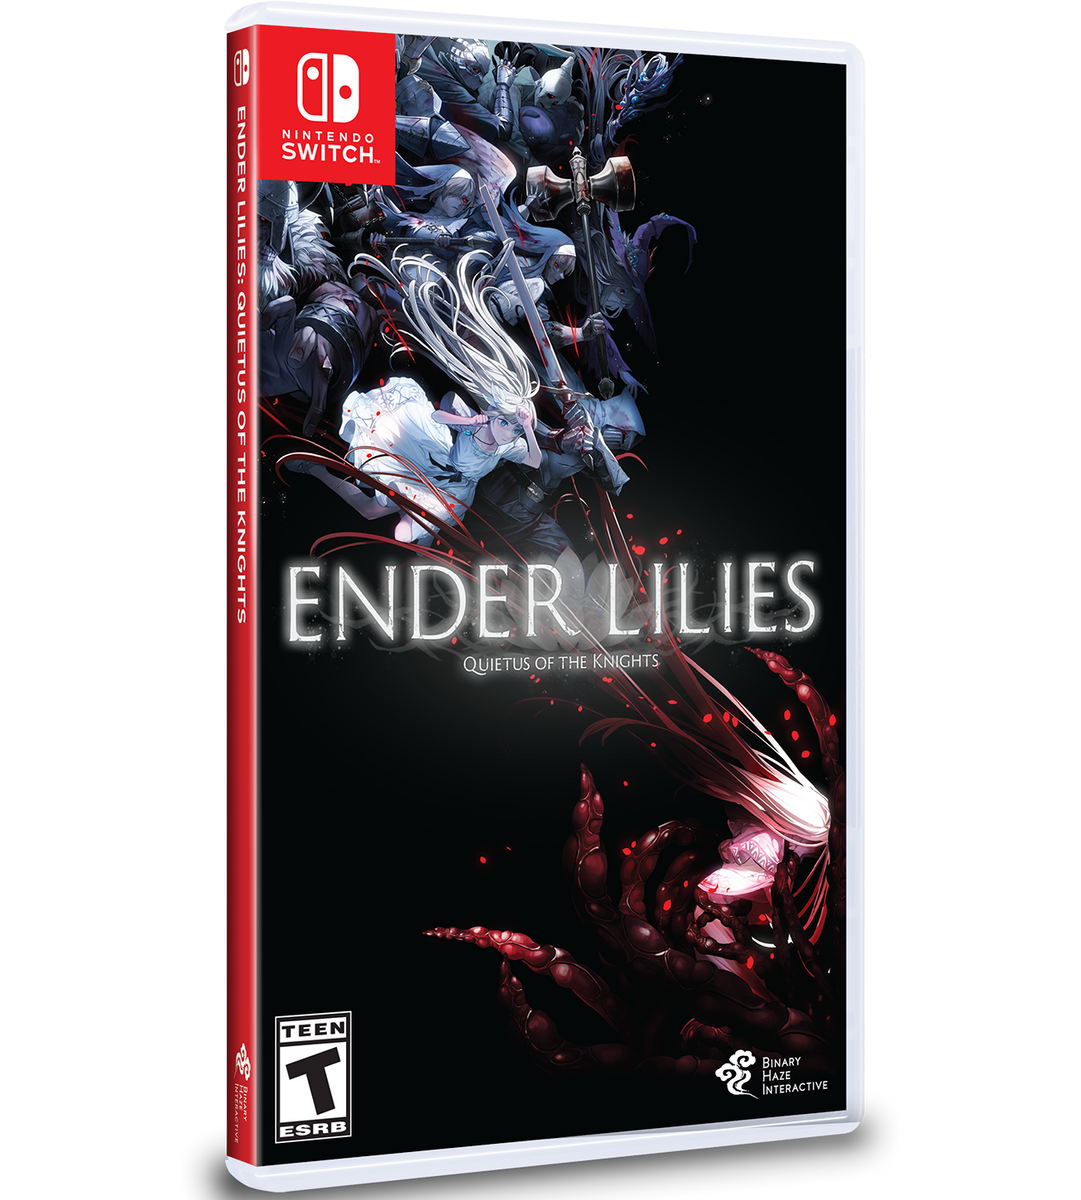 ENDER LILIES: Quietus of the Knights Journeys to Nintendo Switch on June  21st